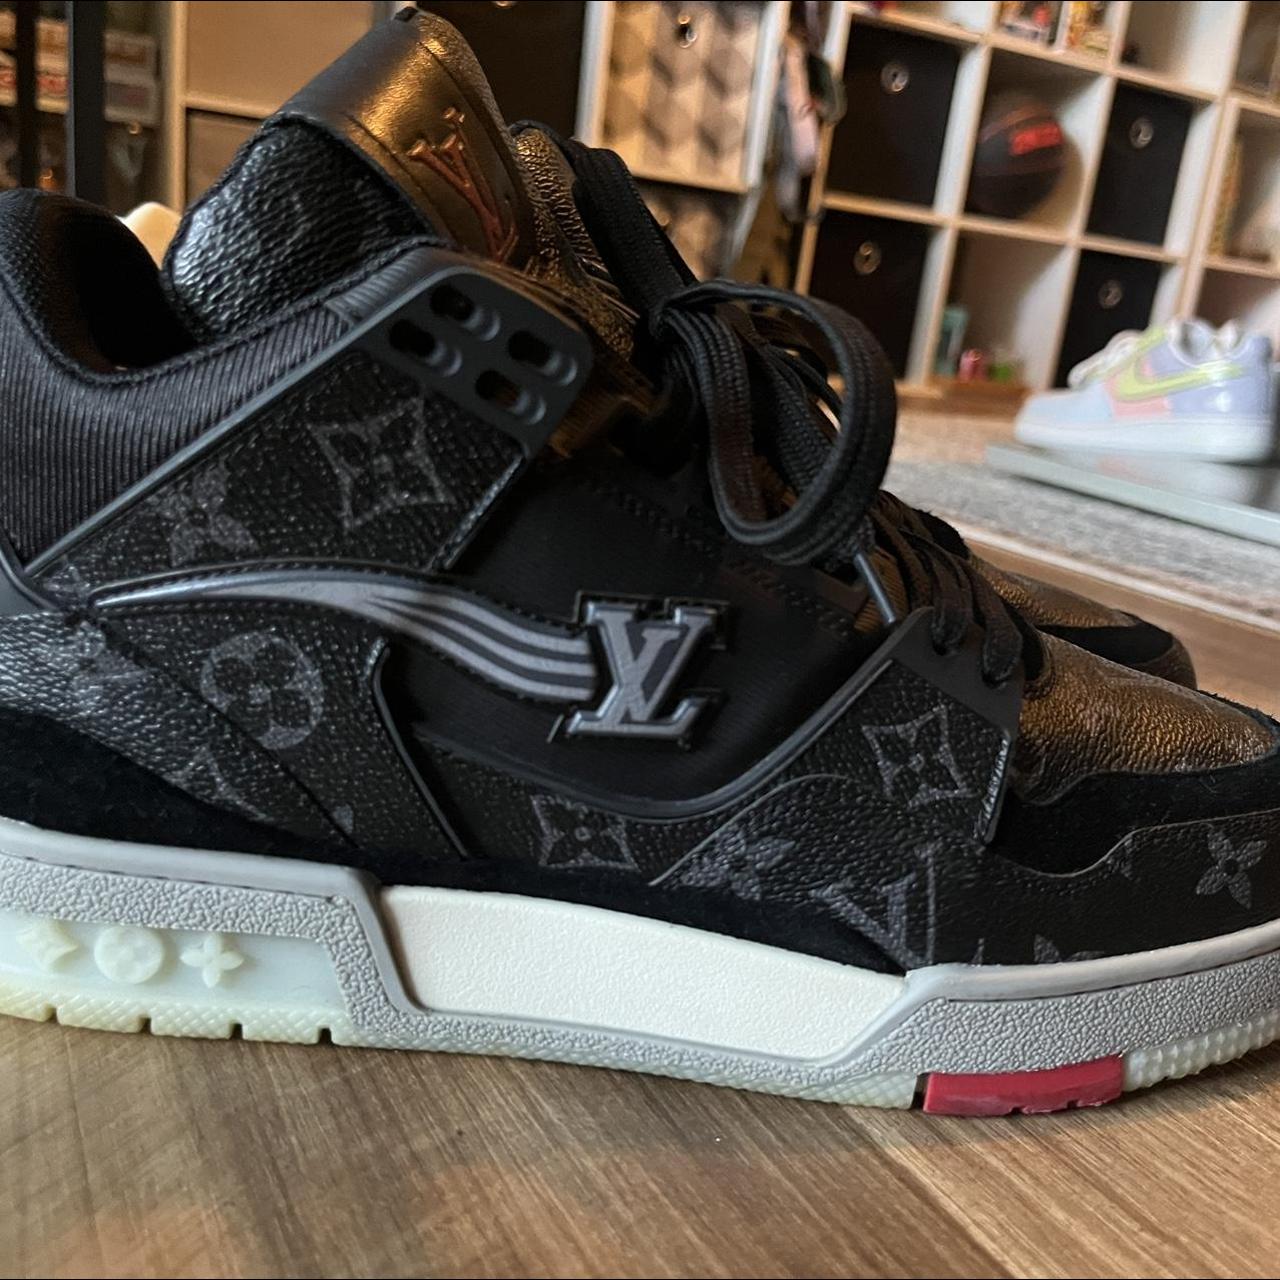 Louis Vuitton Trainer Black Grey And White Size 9